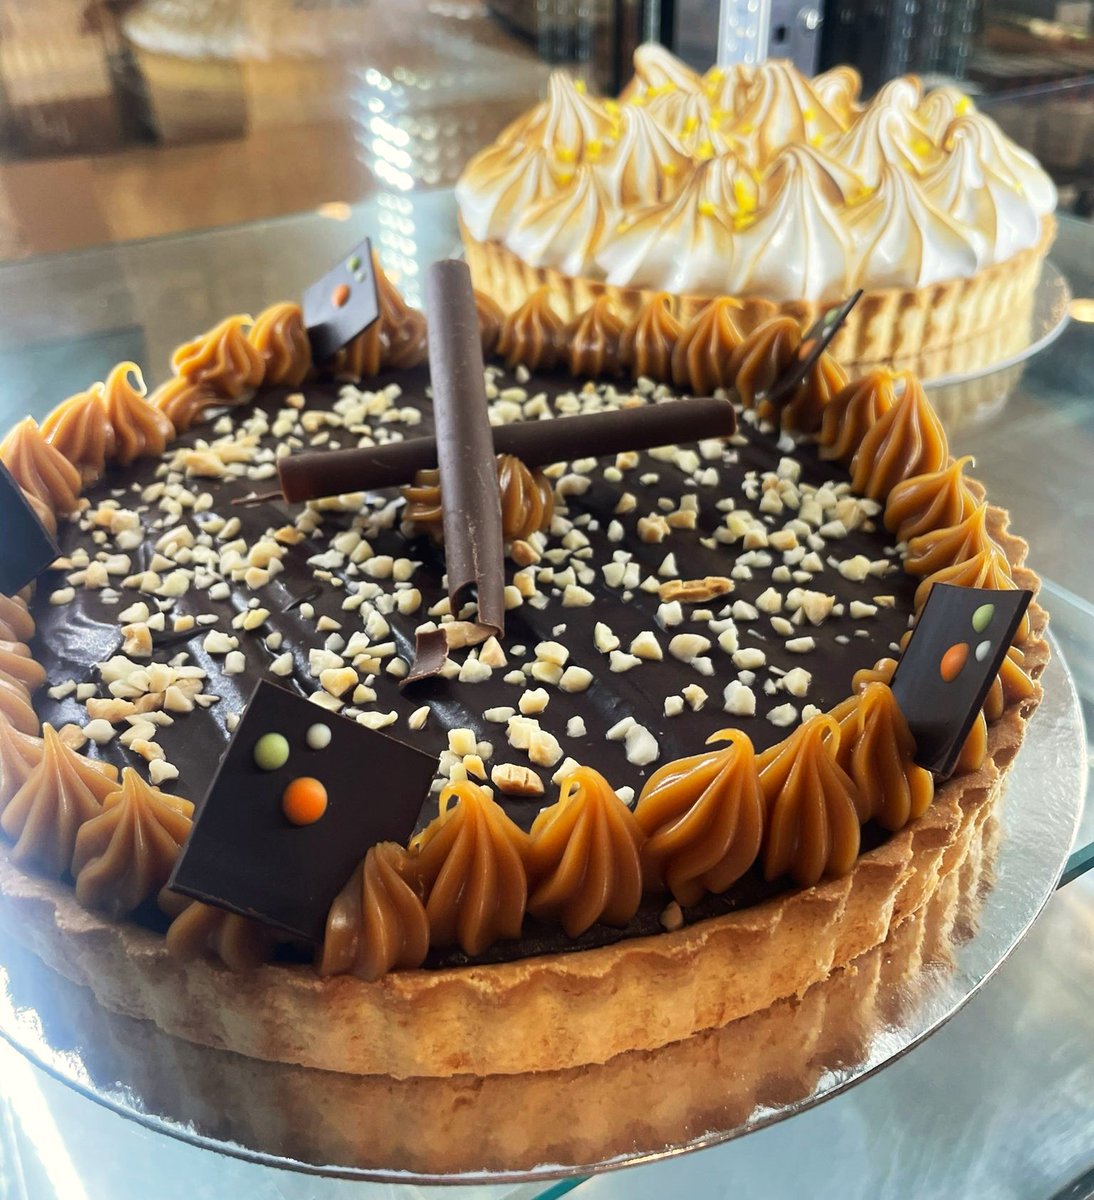 Woweee. Our bakery has produced a new range of delicious desserts now made daily for your discerning palates. Think - Lemon meringue with fresh raspberries or Salted caramel chocolate tart, for instance. They can also be made to order for special occasions 
#desserts #freshbaked